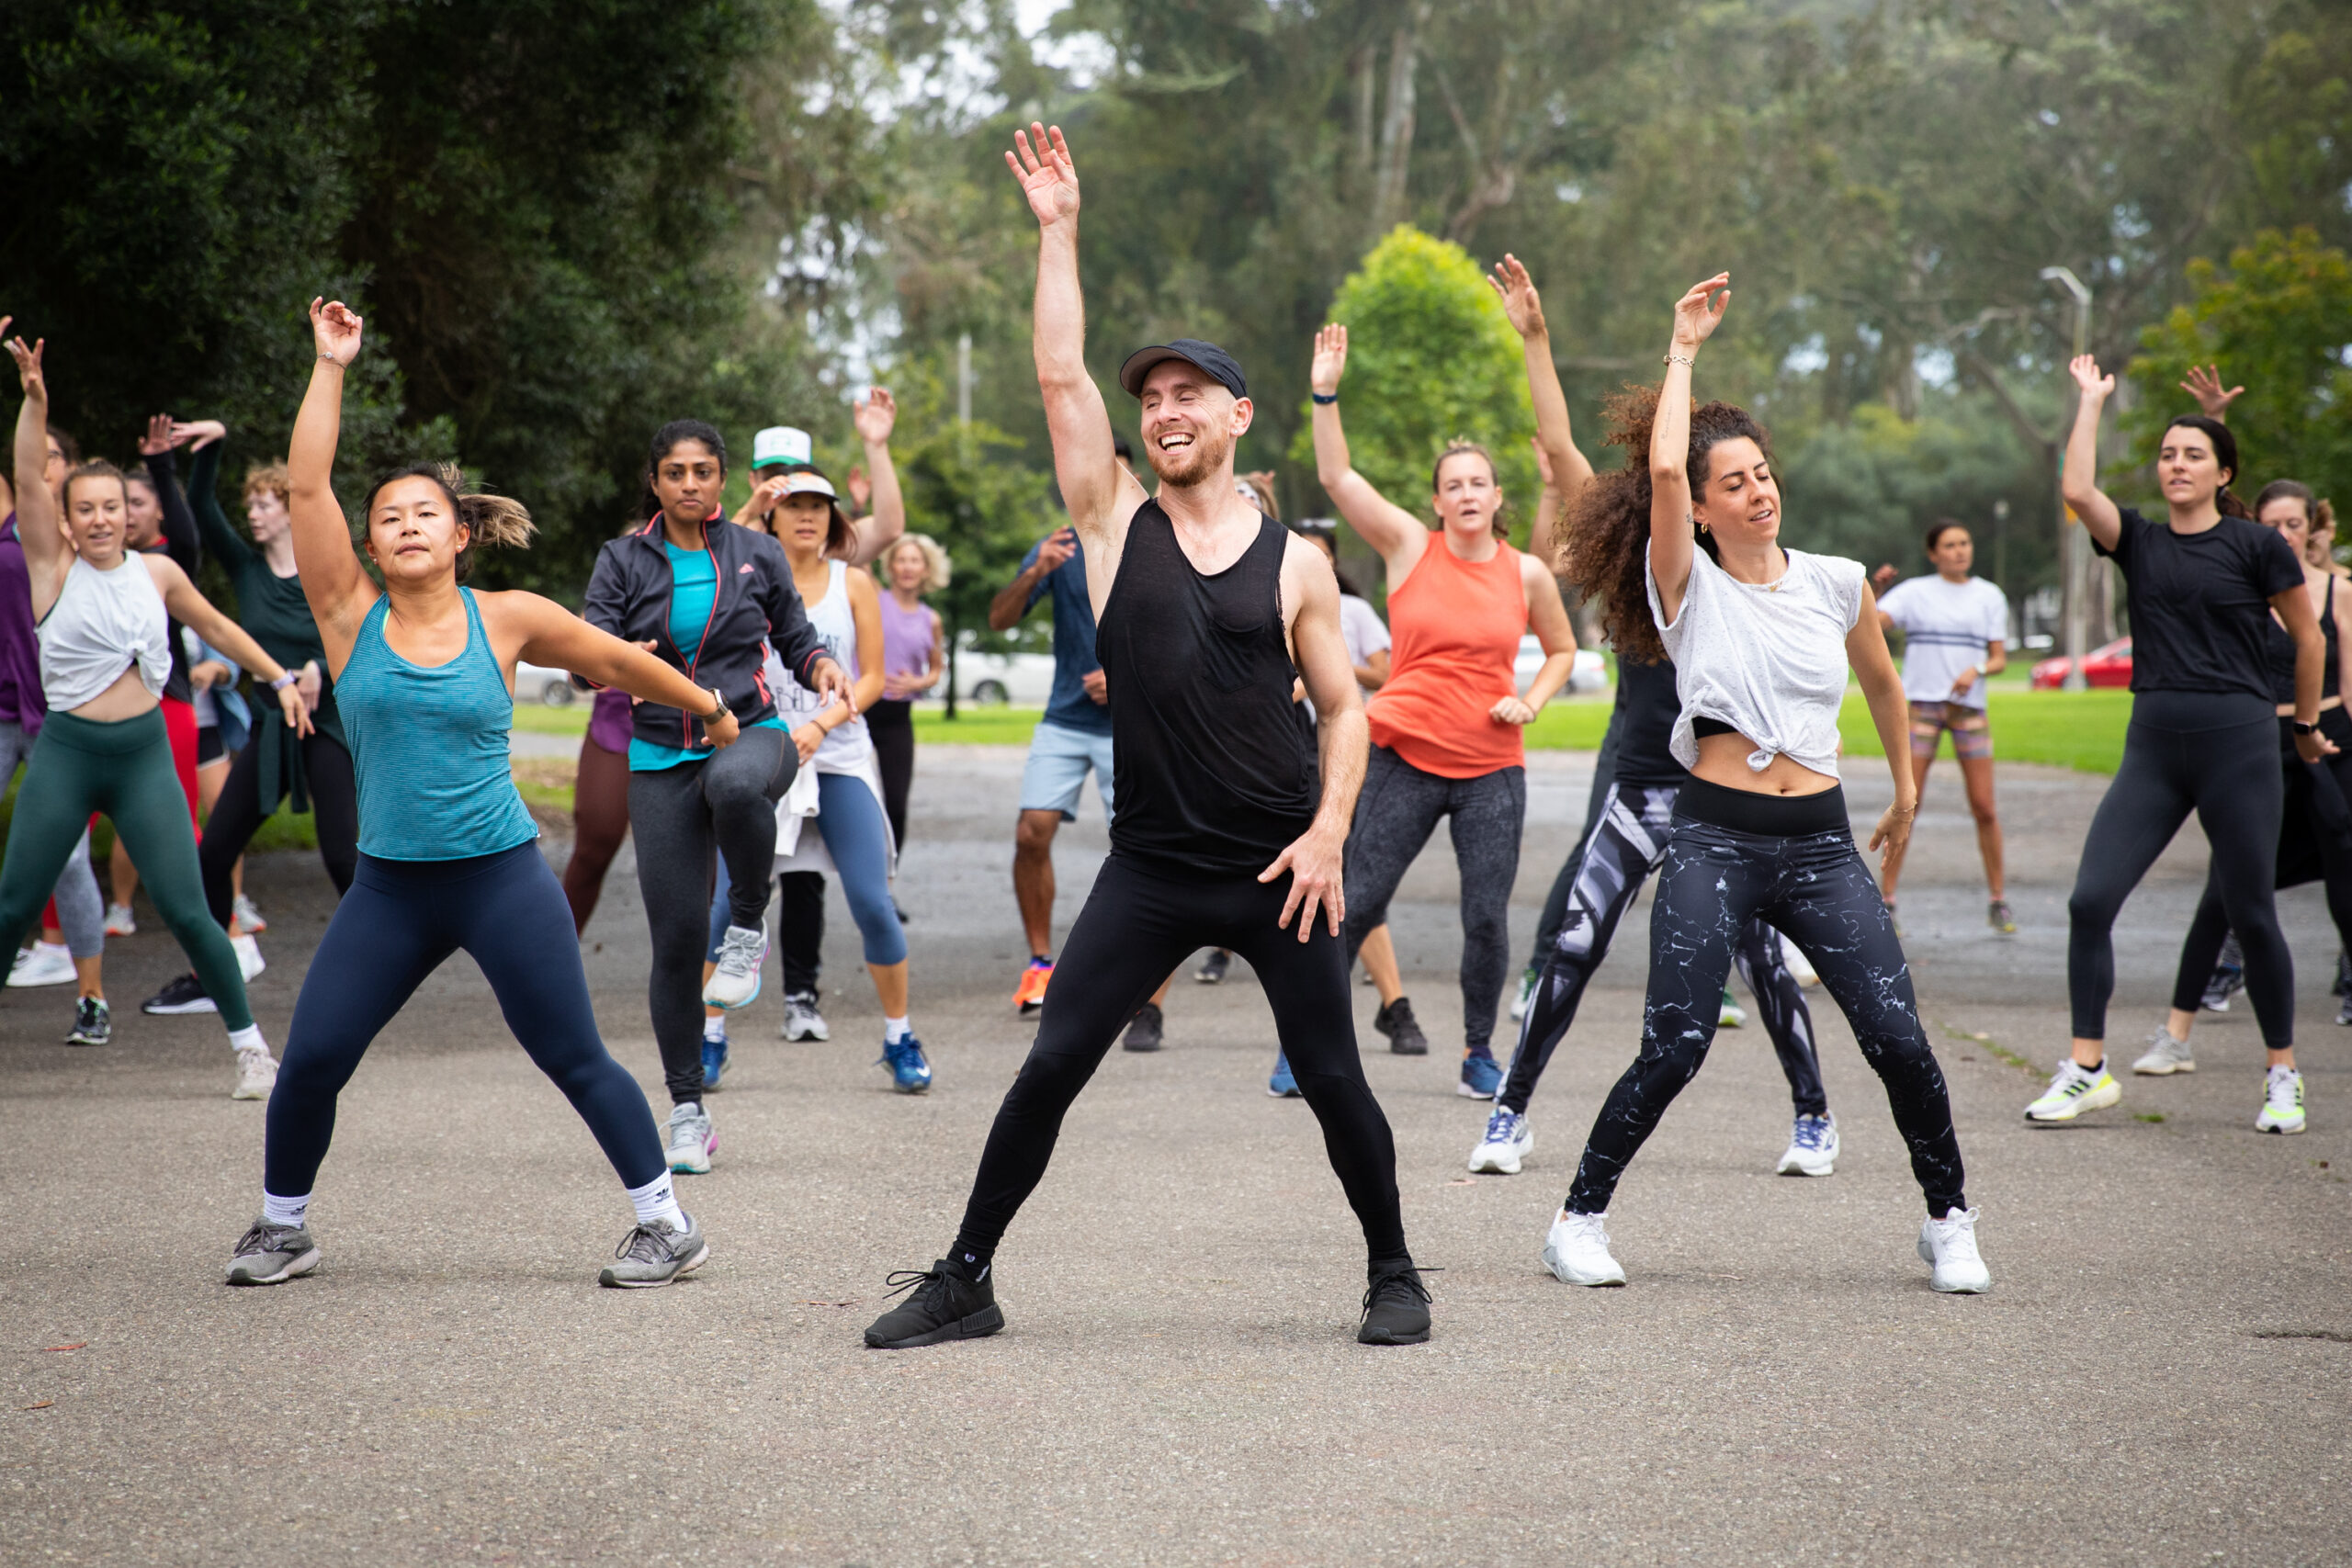 Free Outdoor Dance Fitness Class Draws Crowds Every Weekend